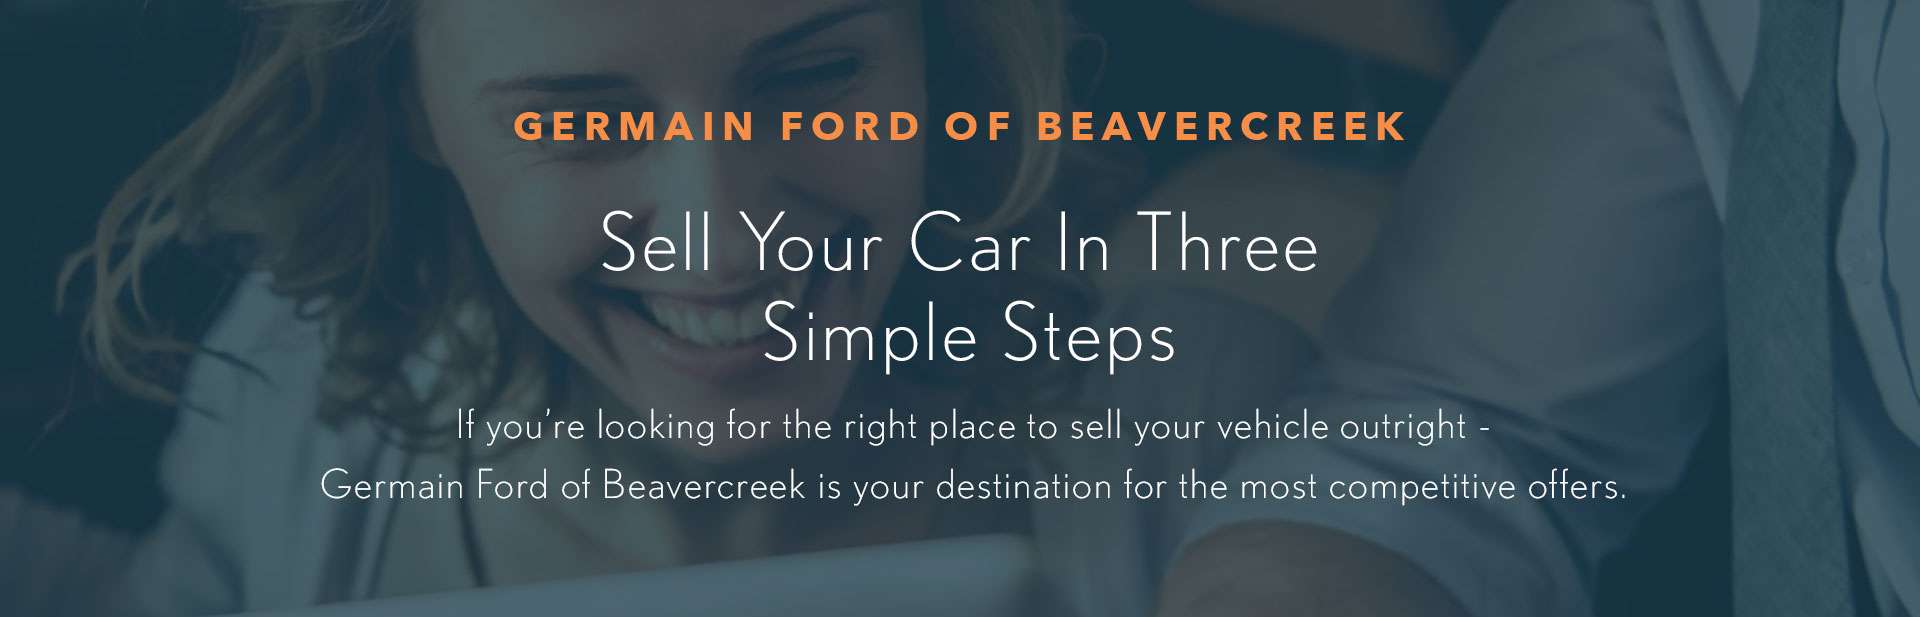 Germain Ford of Beavercreek- Sell Your Car In Three Simple Steps